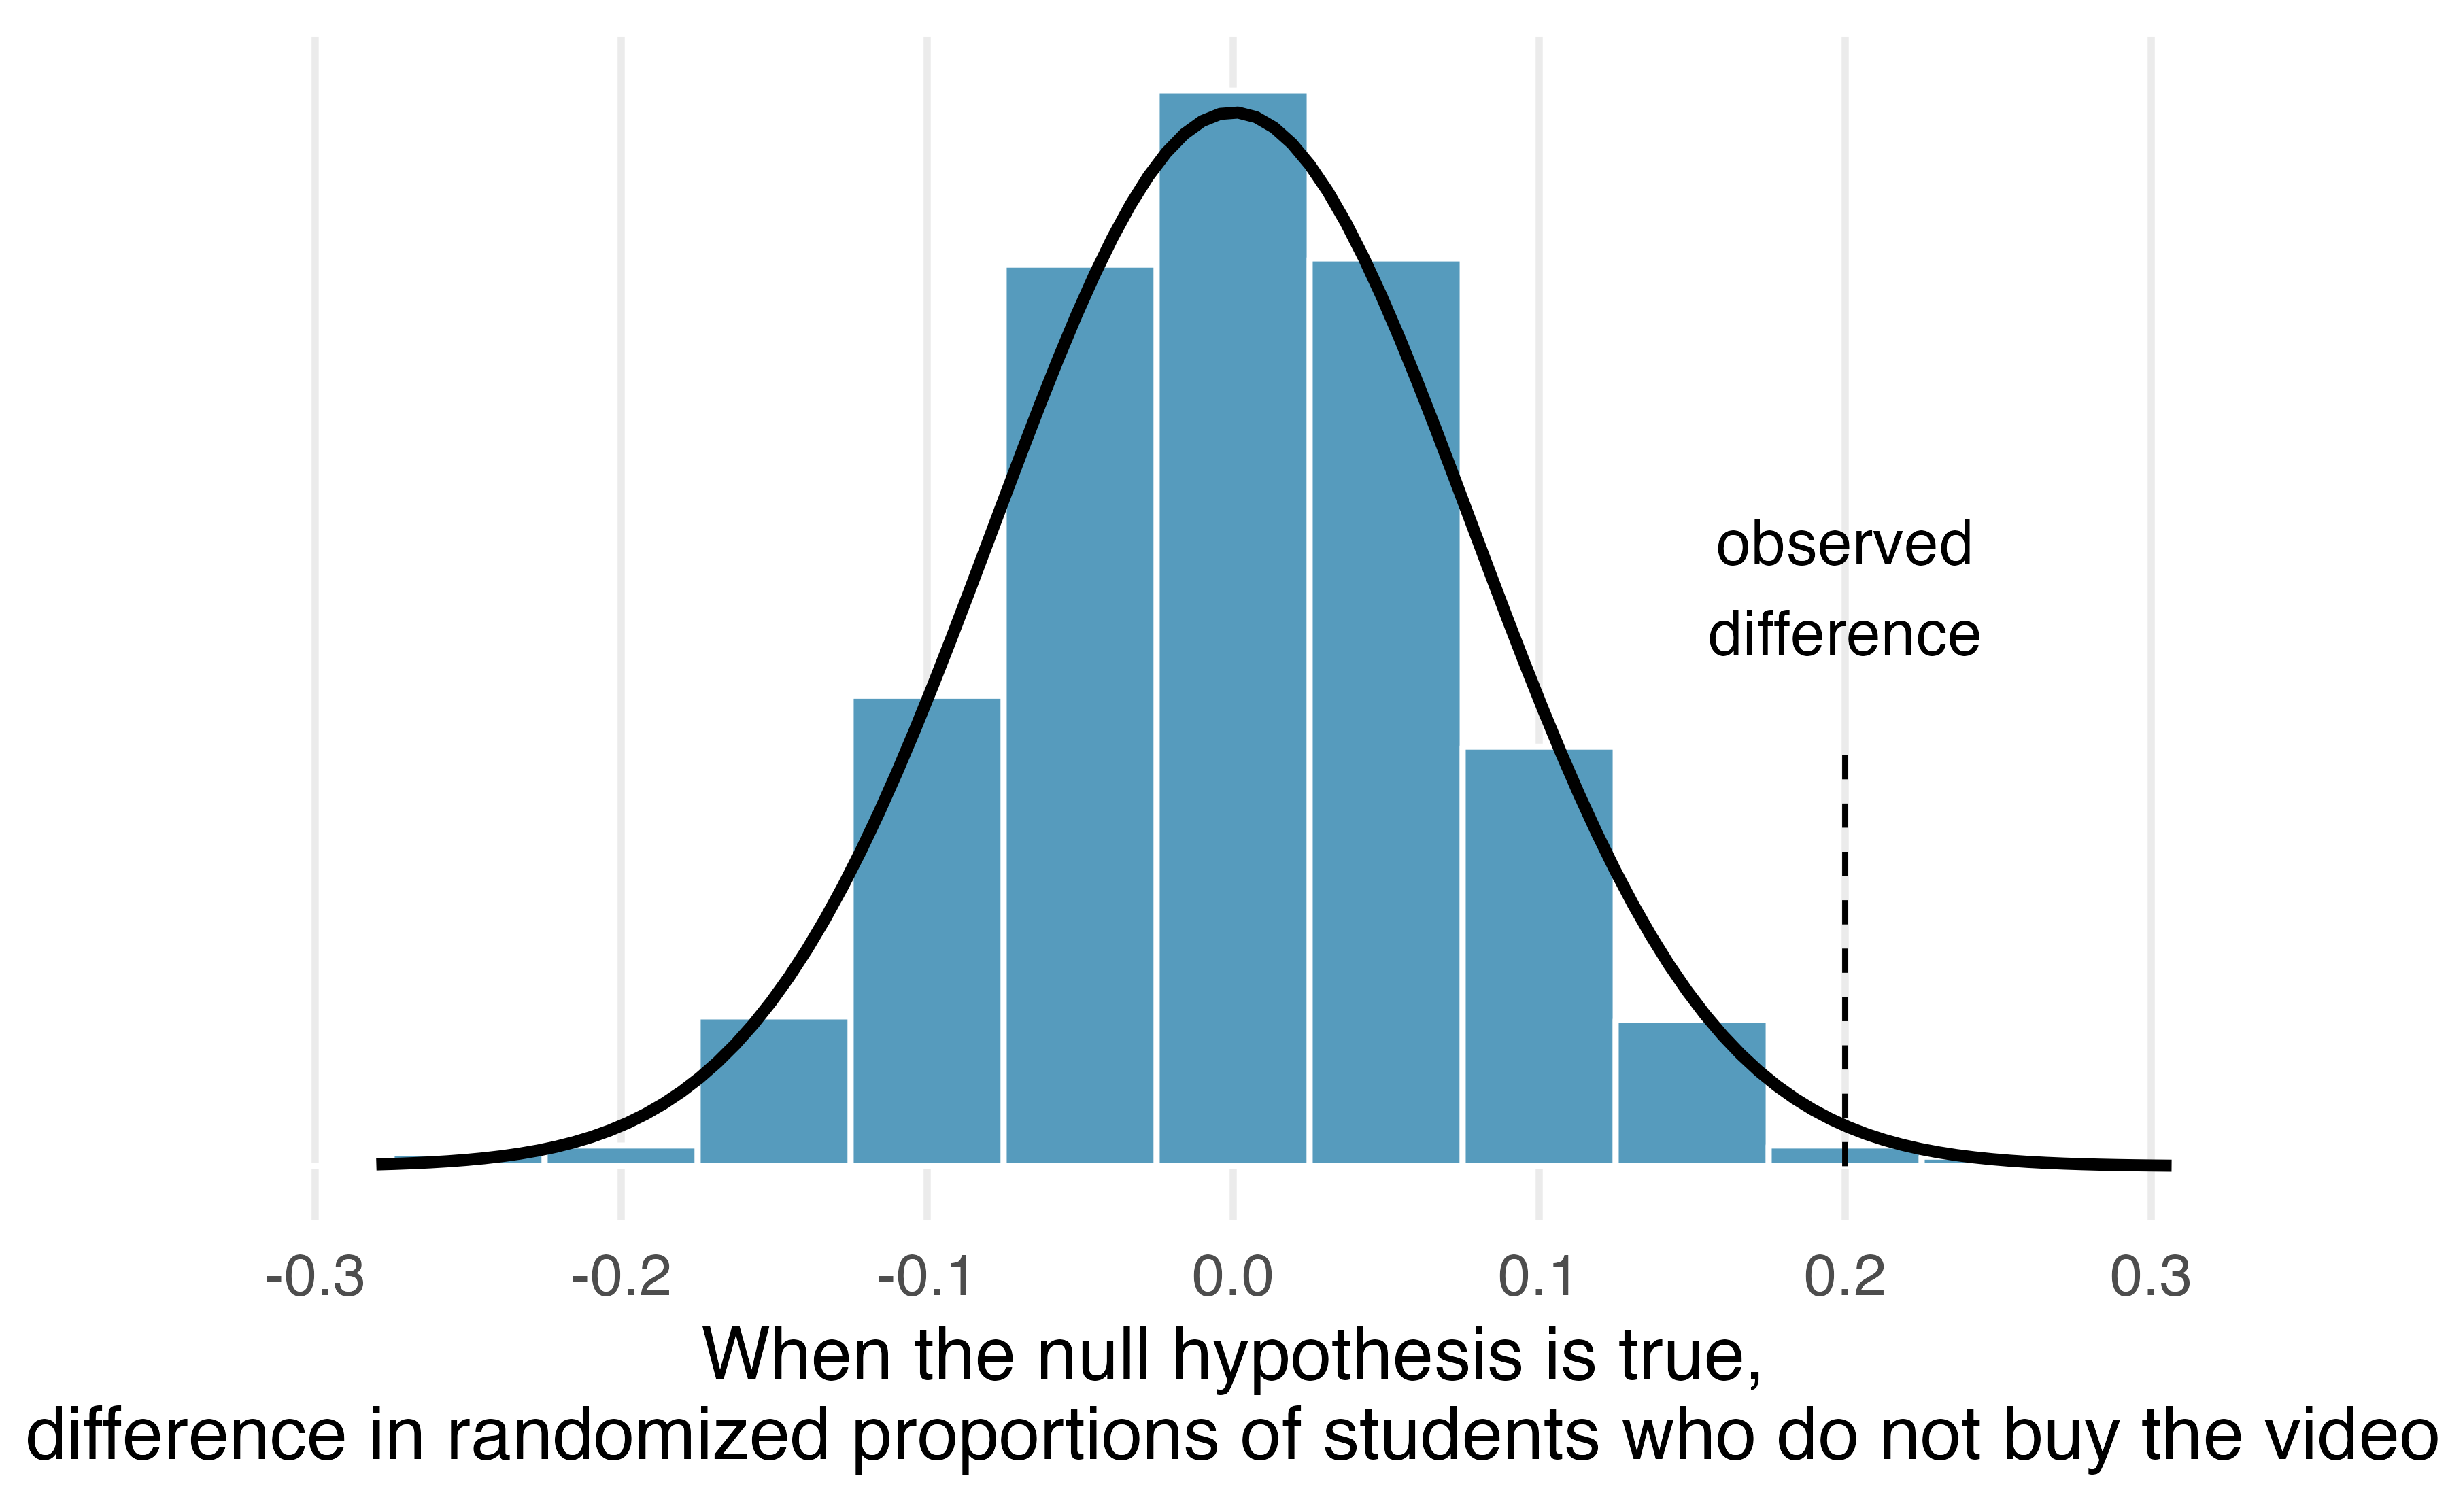 Normal curve overlaid on the histogram of the simulated differences in sample proportions in the opportunity cost study.  The theoretical normal distribution fits the histogram quite well.  The observed difference in sample proportions of 0.2 is in the tail of both the normal curve and the histogram.